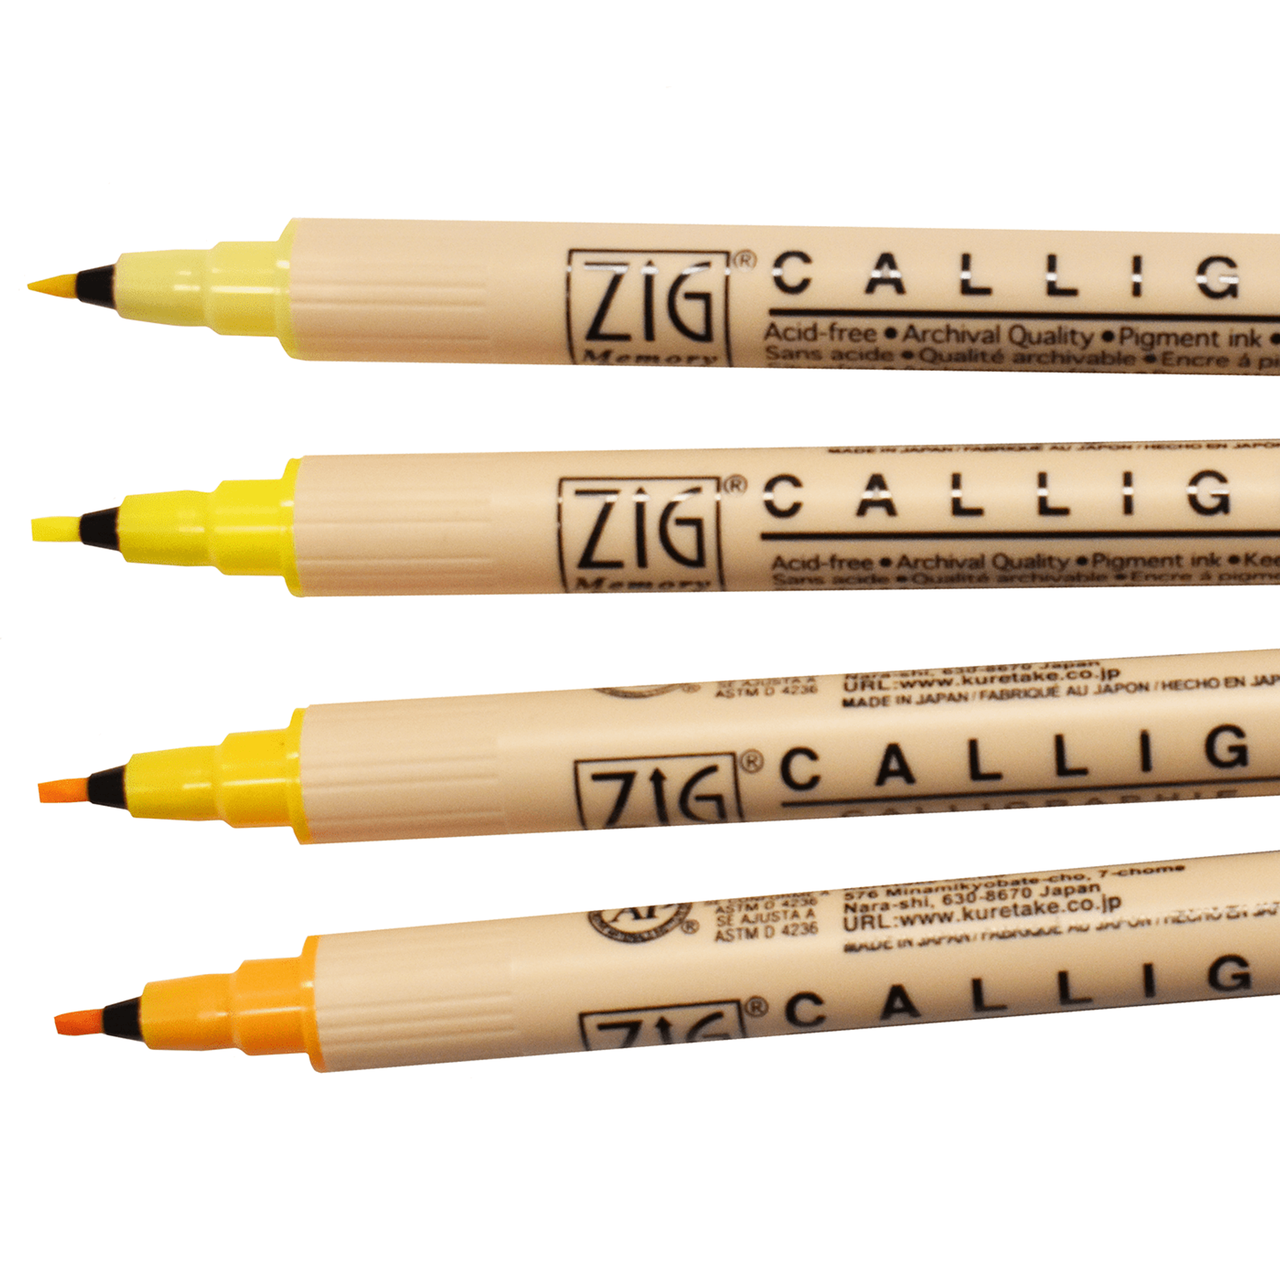 https://cdn11.bigcommerce.com/s-r6vjsnlxmh/images/stencil/1280x1280/products/3871/3423/zig-memory-system-calligraphy-marker-set-of-4-yellow-2__64467.1660263340__99330.1680199665.png?c=1